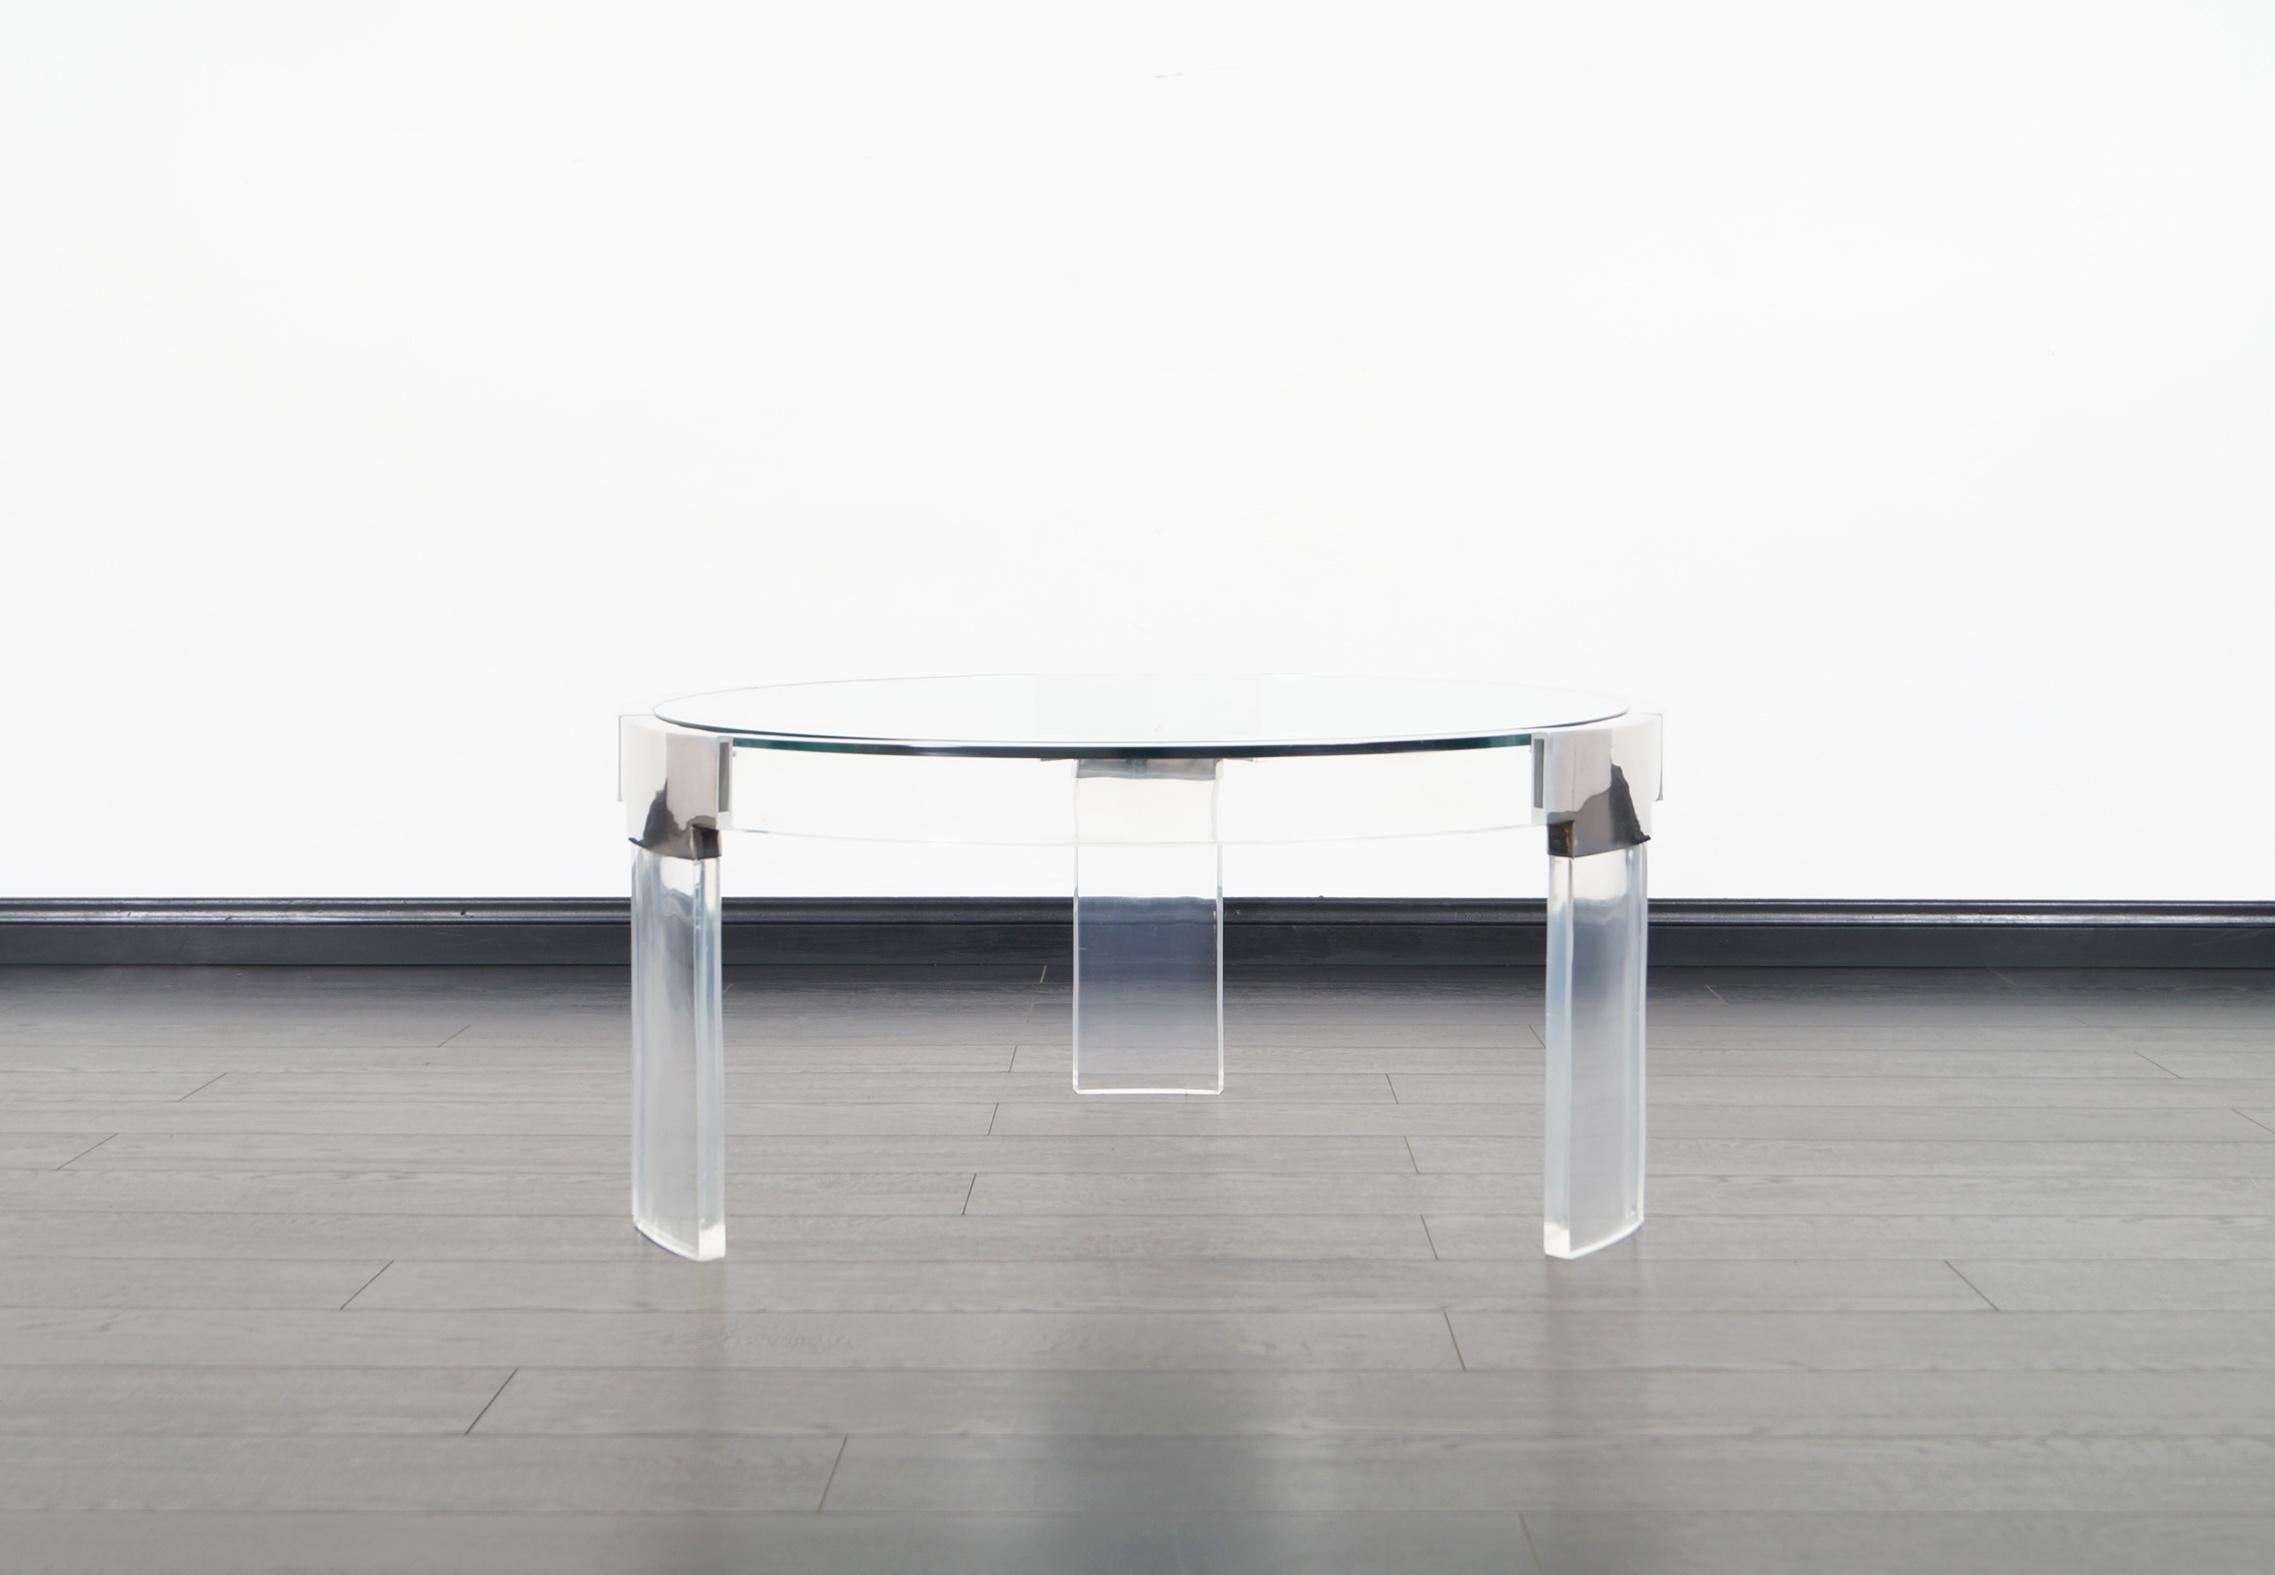 Fabulous vintage Lucite and chrome coffee table designed by Charles Hollis Jones in the United States, circa 1970s. This exceptional table is part of the “Waterfall Line” collection. Features a wide and elegant inset glass top with thick curved